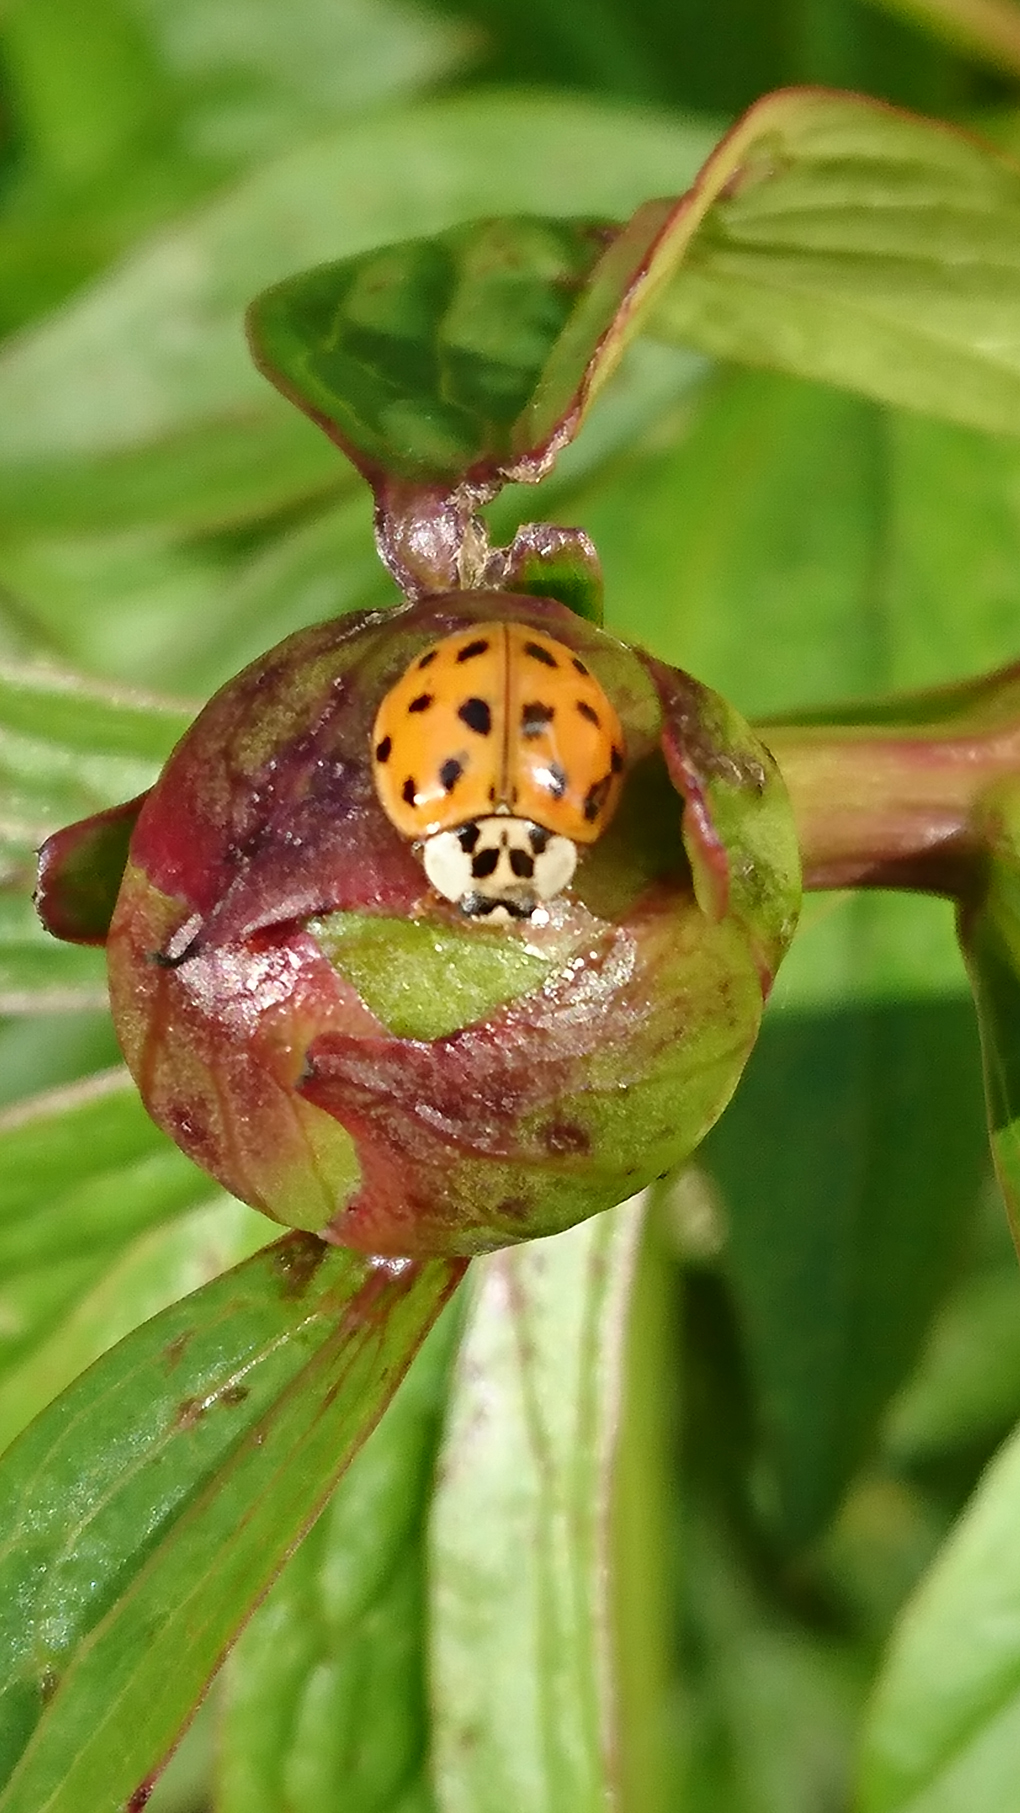 A beautiful orange ladybird with black spots with an amazingly cheeky white face was found sunbathing on a bud of our Peony Bush. She is an Asian ladybird. Have seen a few unusual insects during this lockdown. A real blessing!